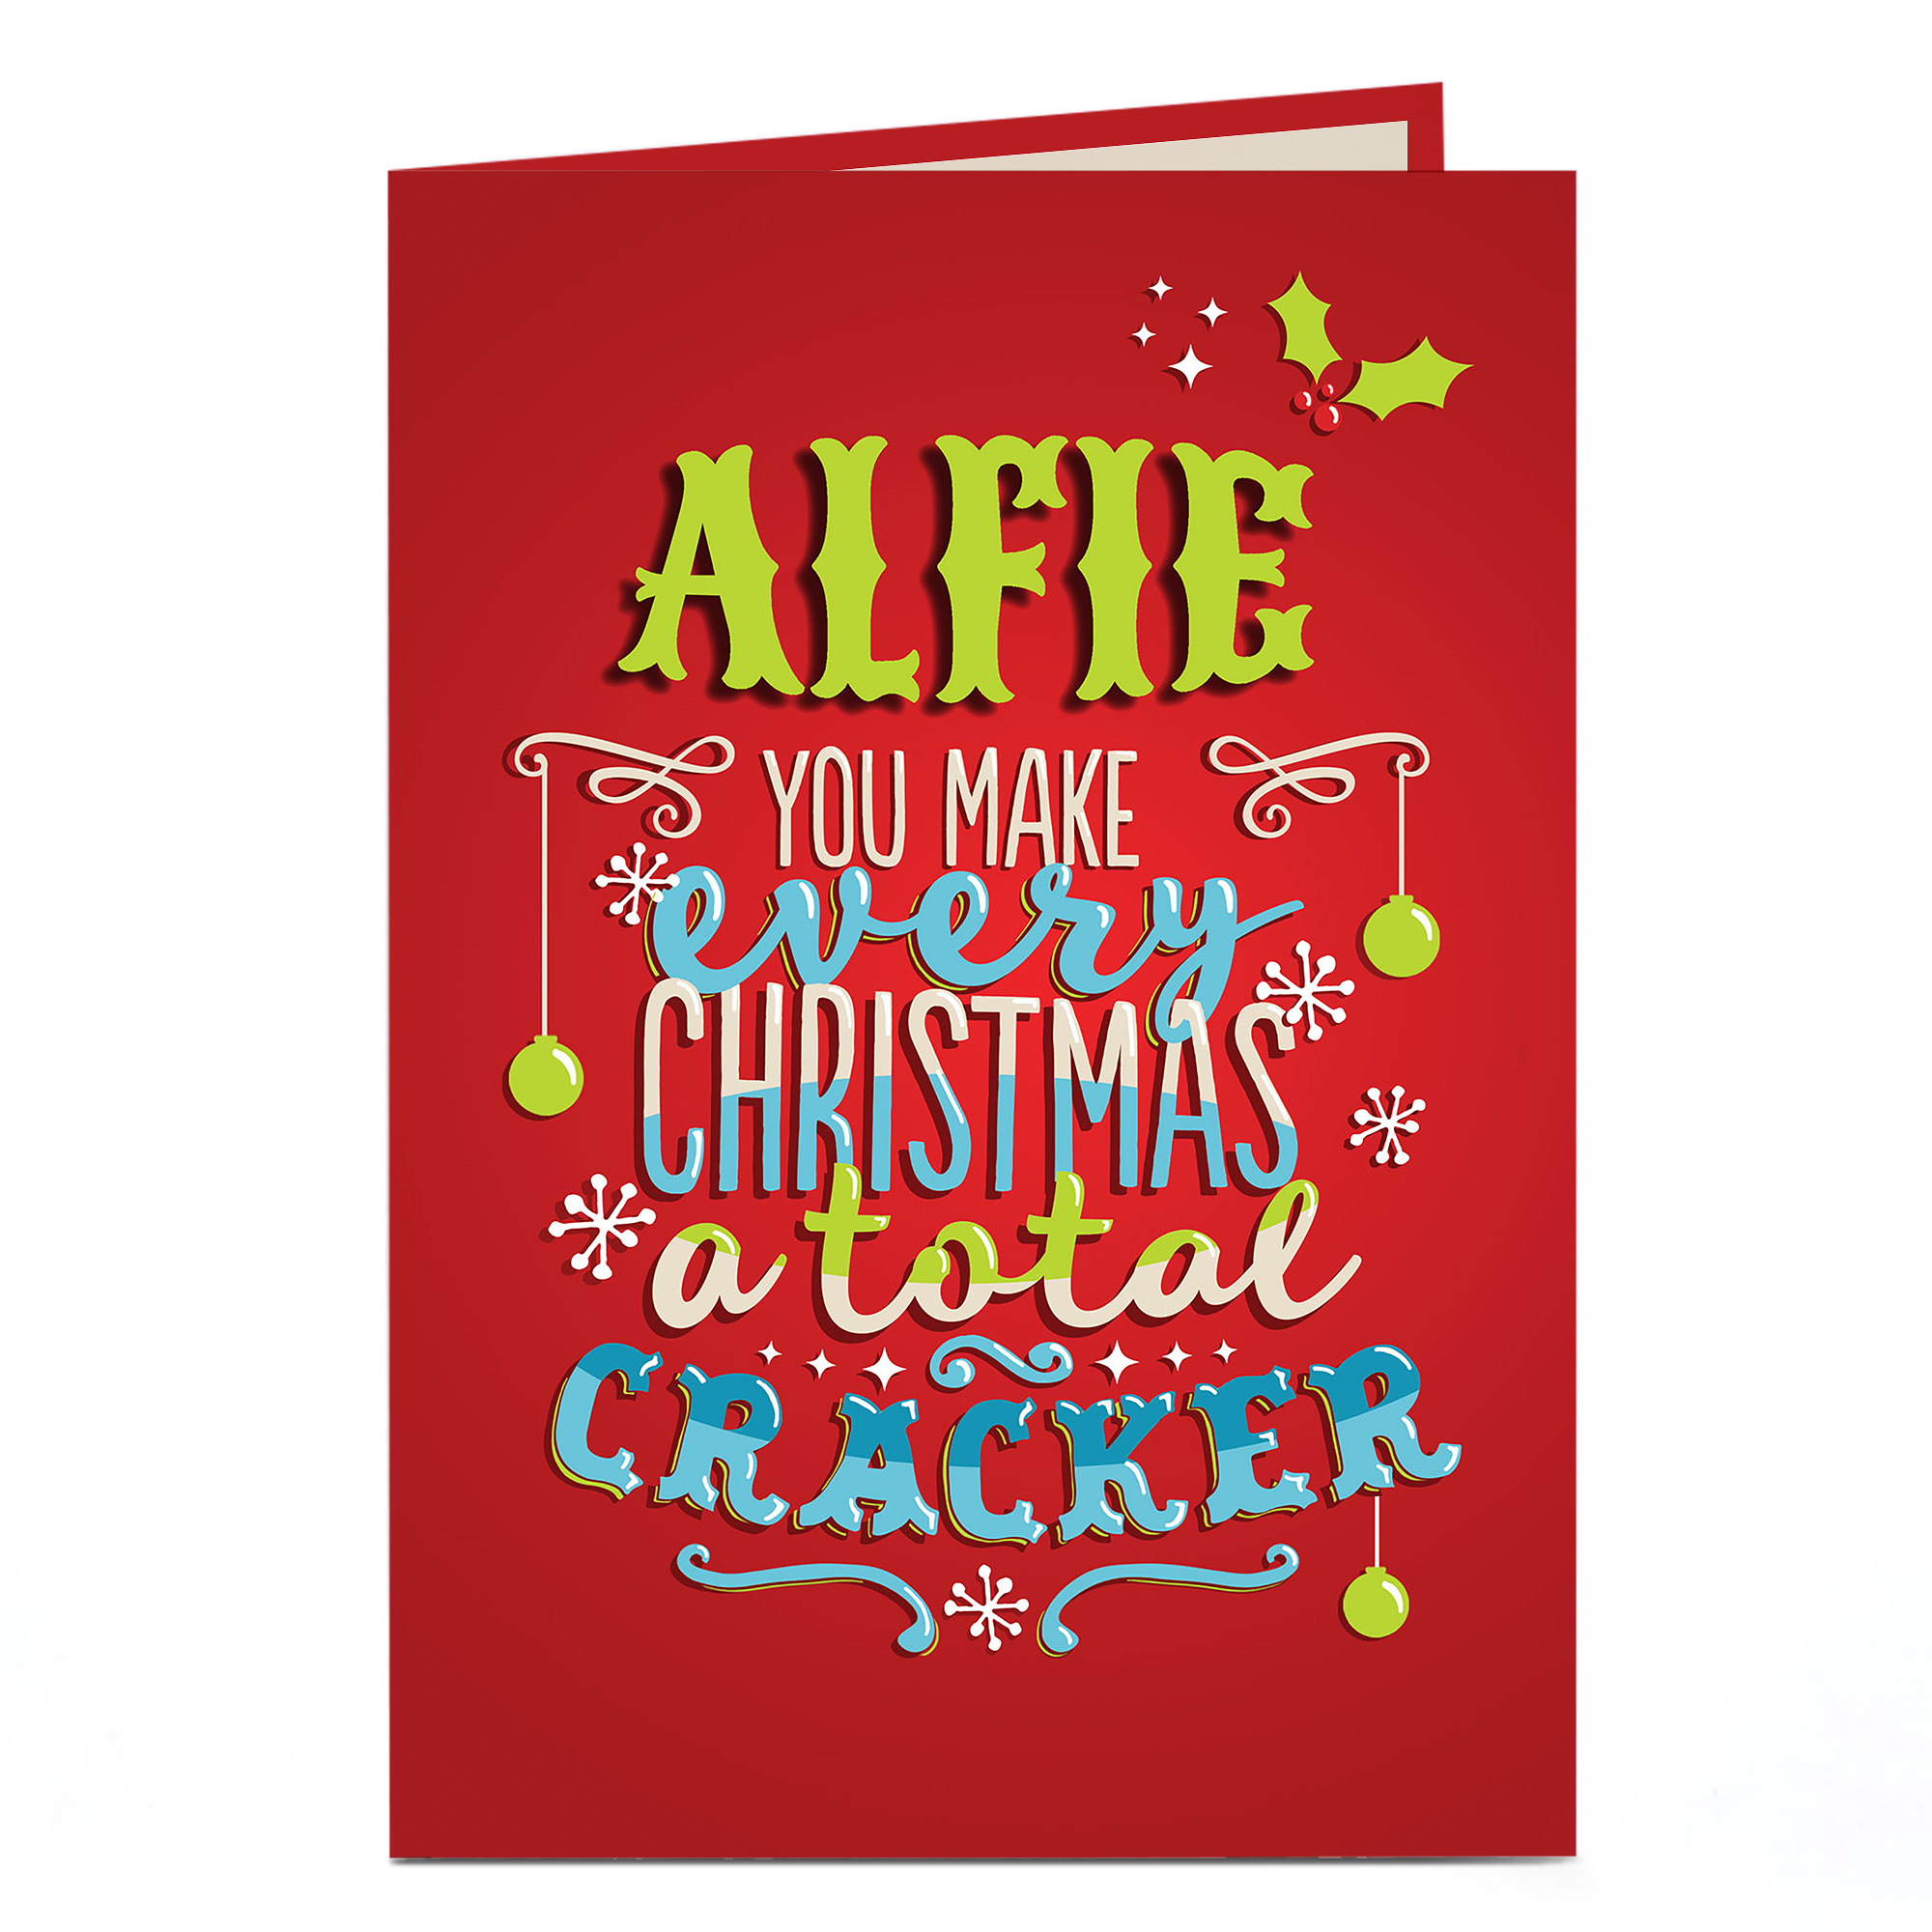 Personalised Christmas Card - A Total Cracker